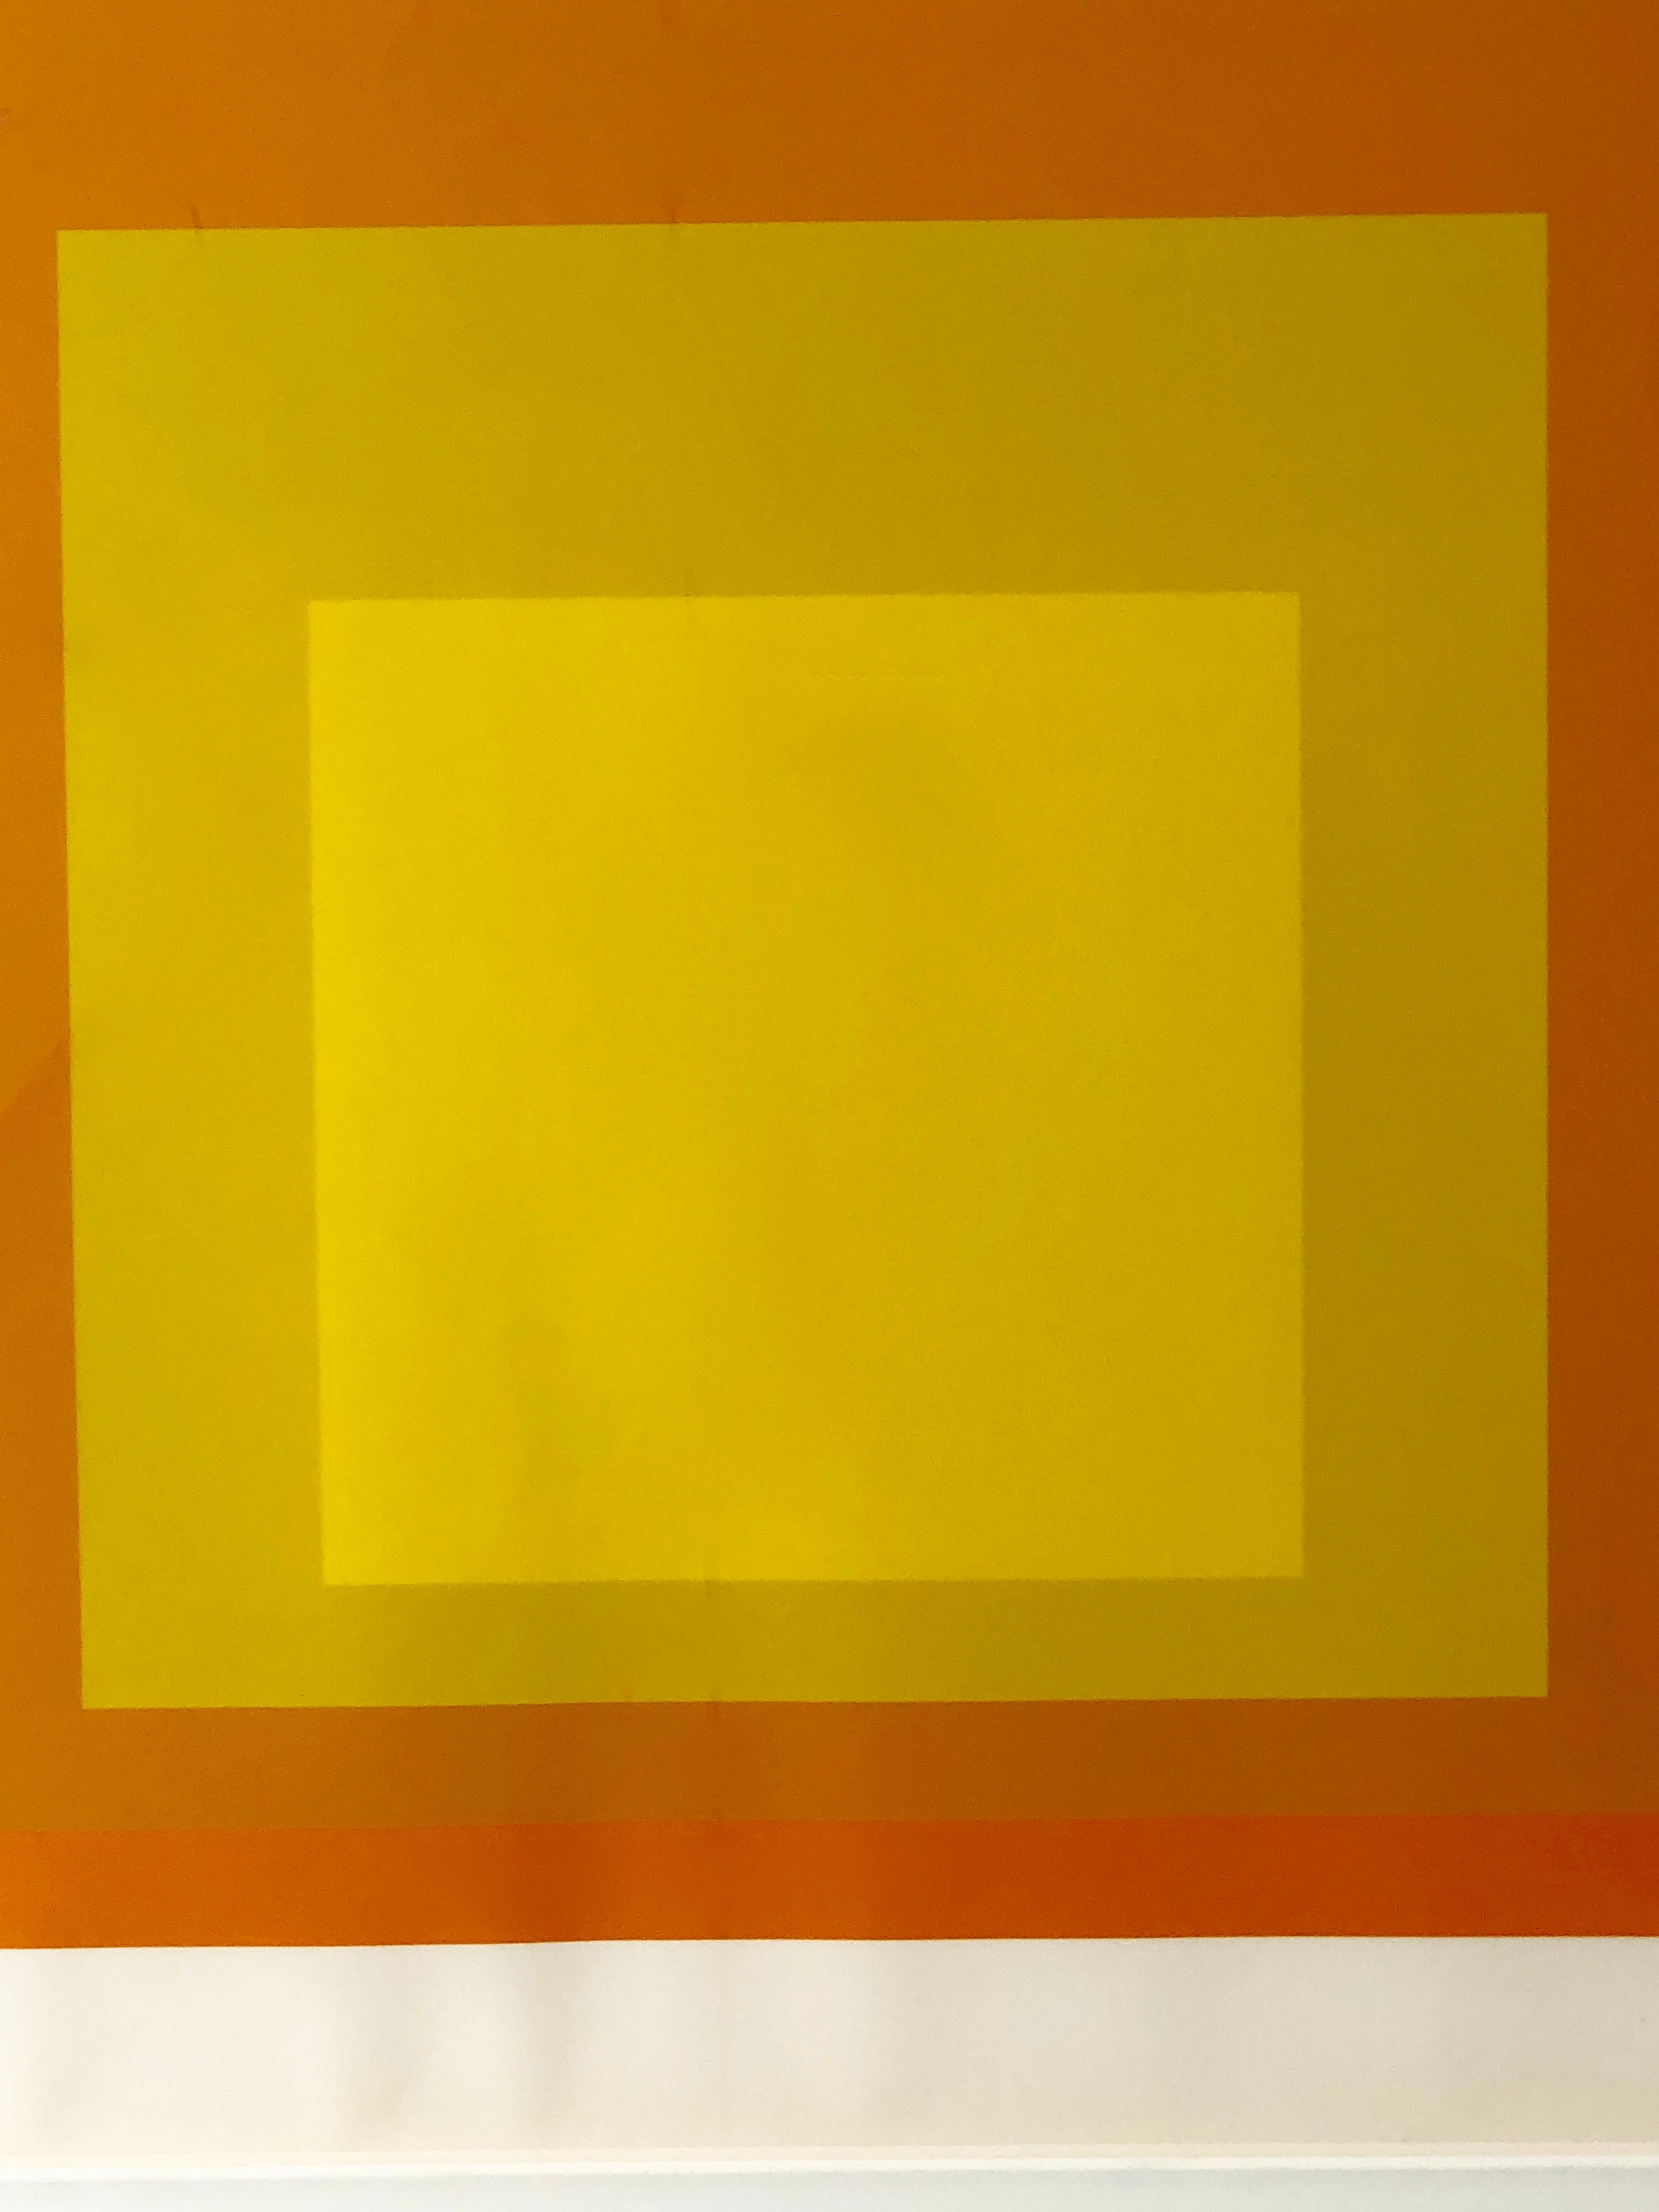 Late 20th Century Albers Yellow and Oranges Silkscreen, Interaction of Color Homage to the Square